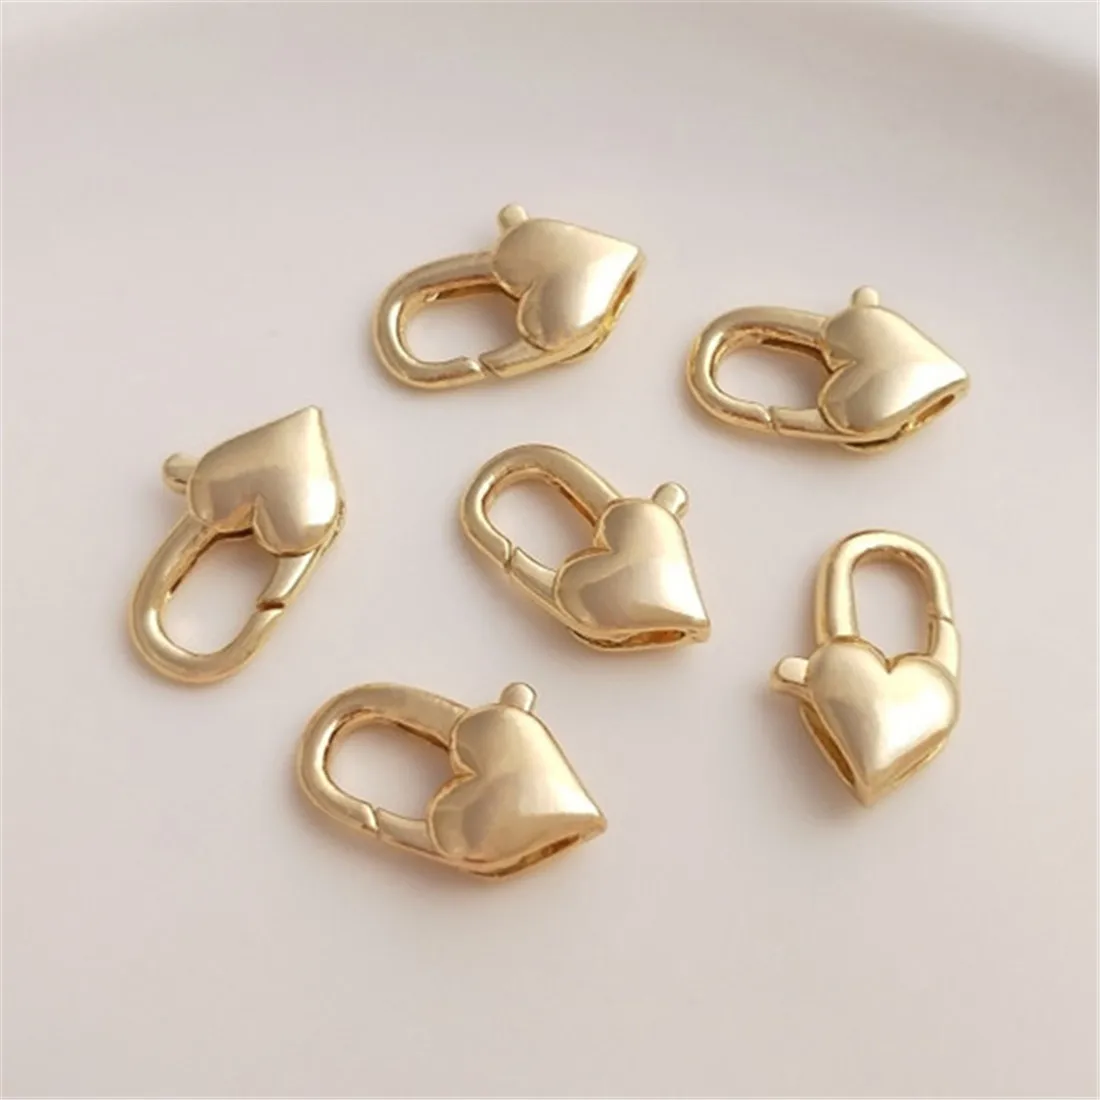 14K Gold Heart-shaped Chain Necklace Clasp Love Lobster Clasp Spring Clasp Diy Handmade Jewelry Accessories B913 10 50pcs 11mm high quality small hook webbing trigger snap hooks hard carabines swivel clasp lobster claws bag parts accessories